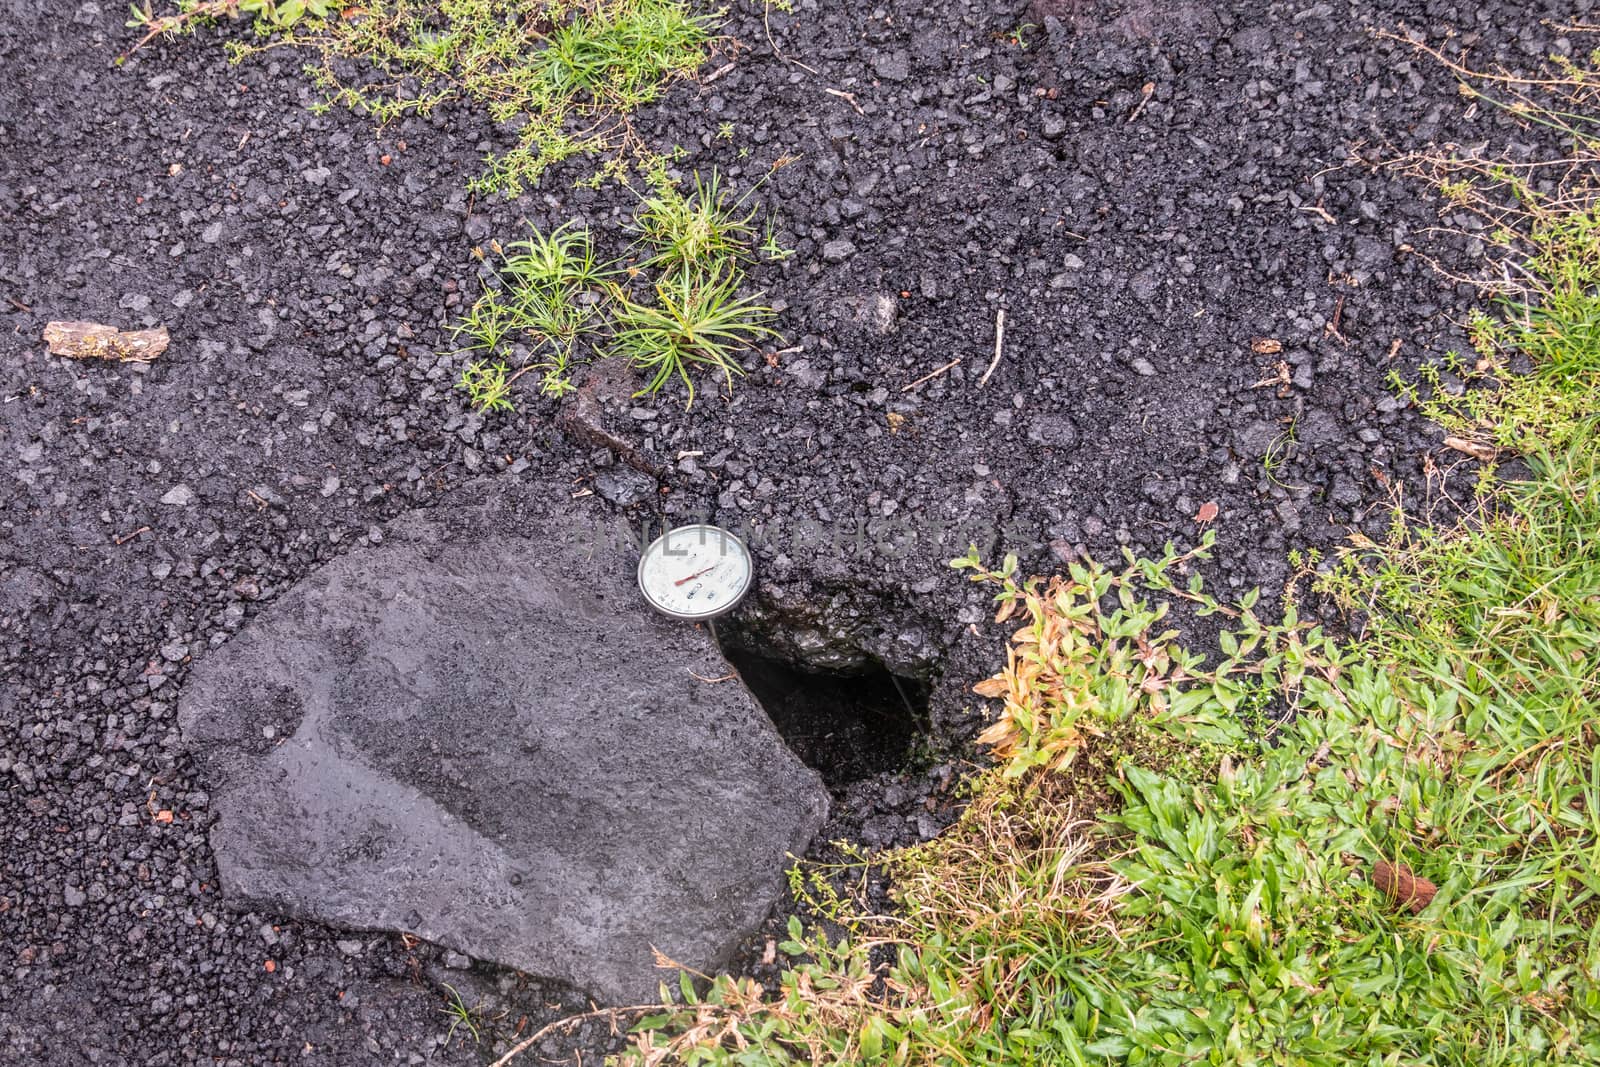 Leilani Estate, Hawaii, USA. - January 14, 2020: Devastation in parts untouched by 2018 lava. Dial placed in crack of road to measure temperature. Placed by government security forces.